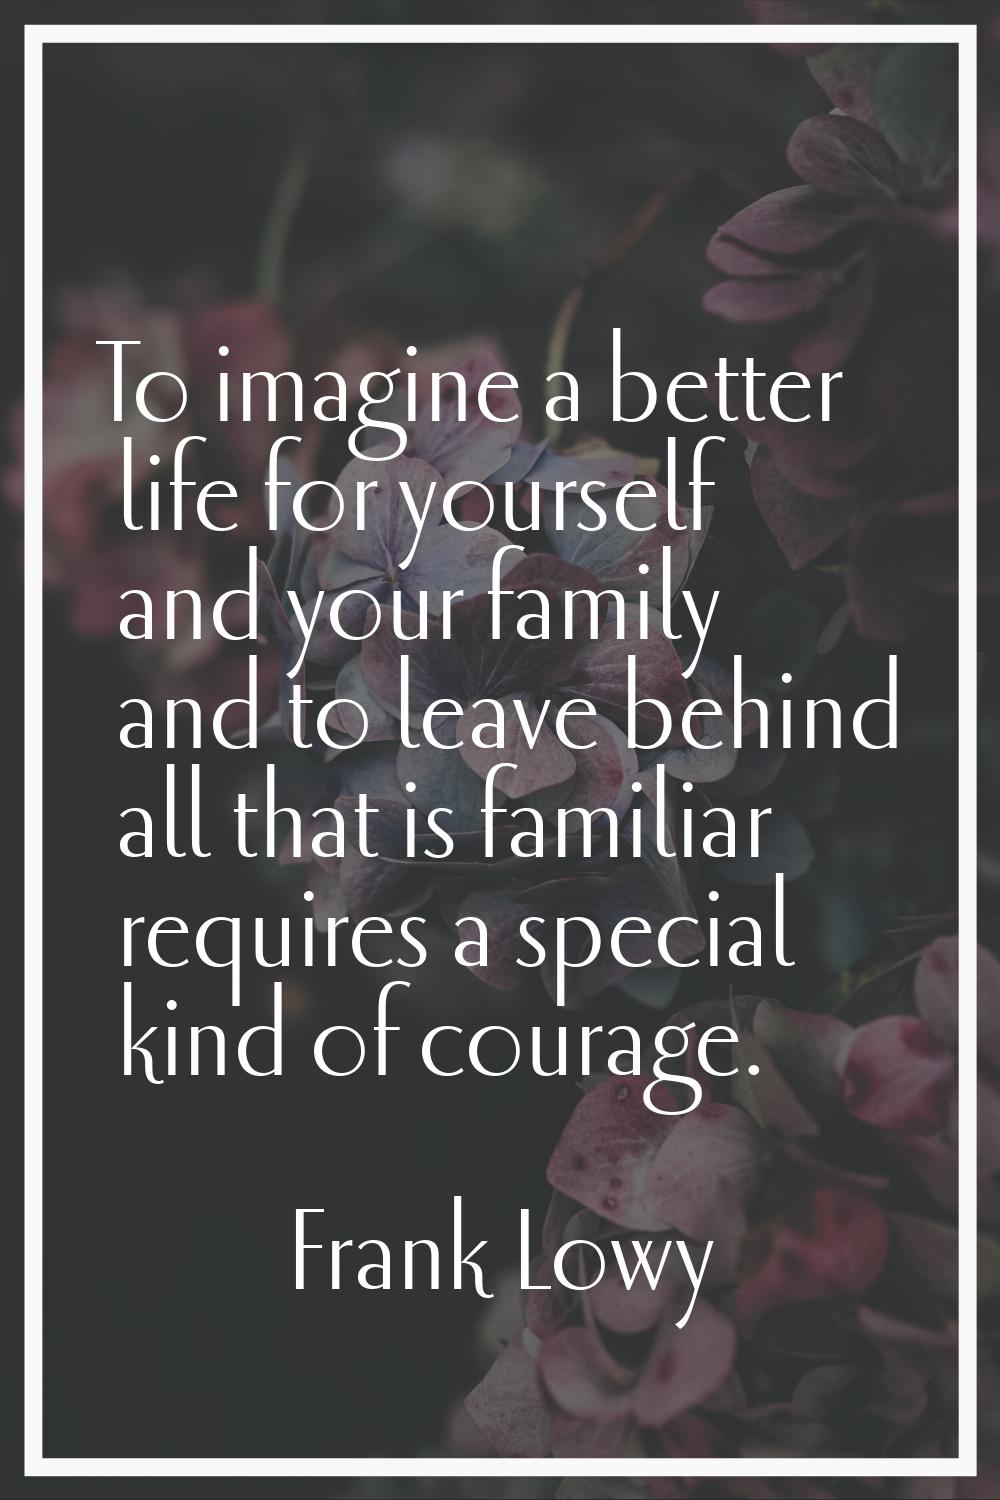 To imagine a better life for yourself and your family and to leave behind all that is familiar requ